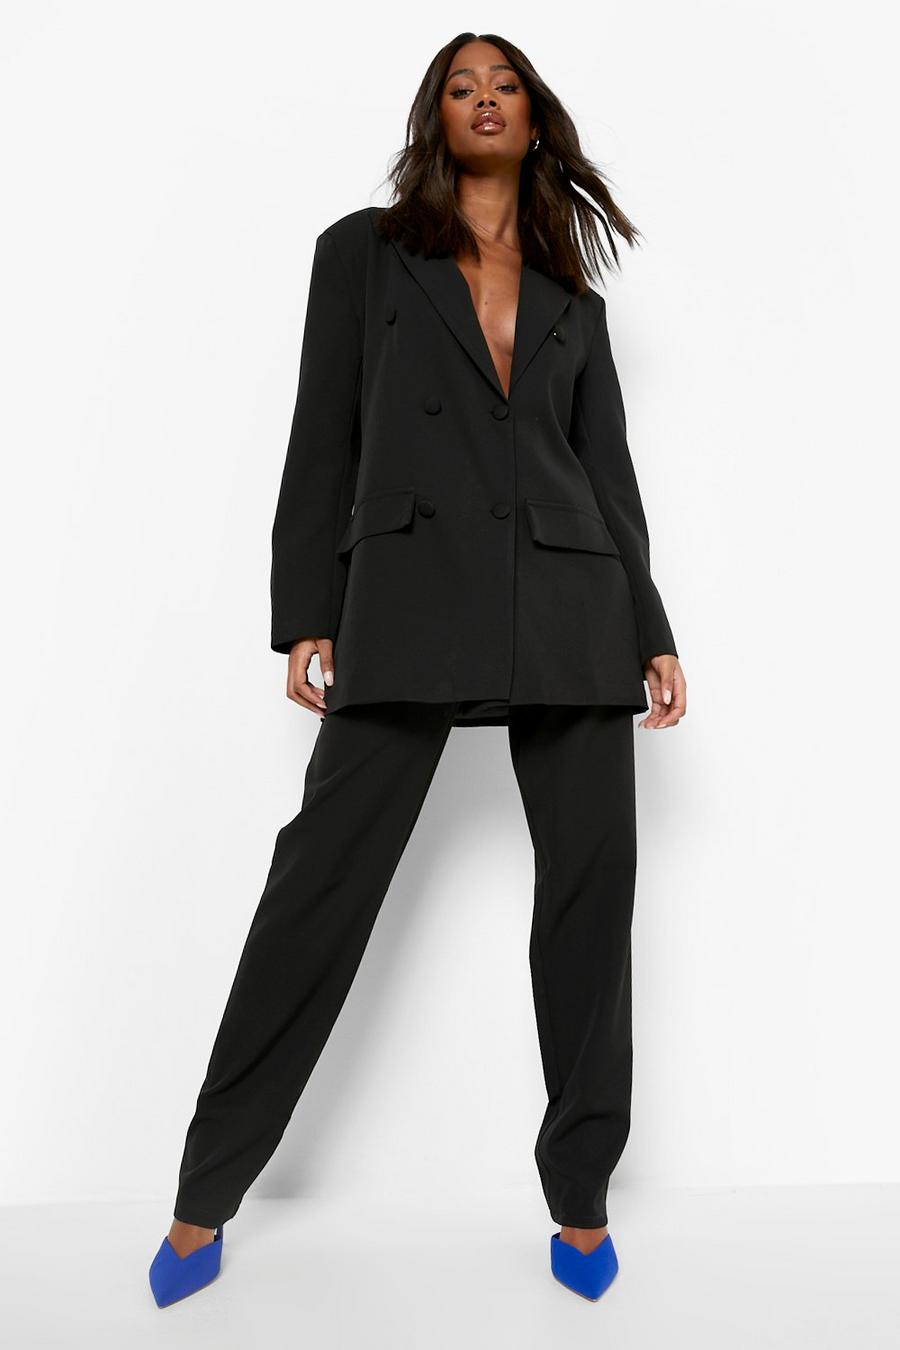 Black Tailored Relaxed Fit Straight Leg Pants